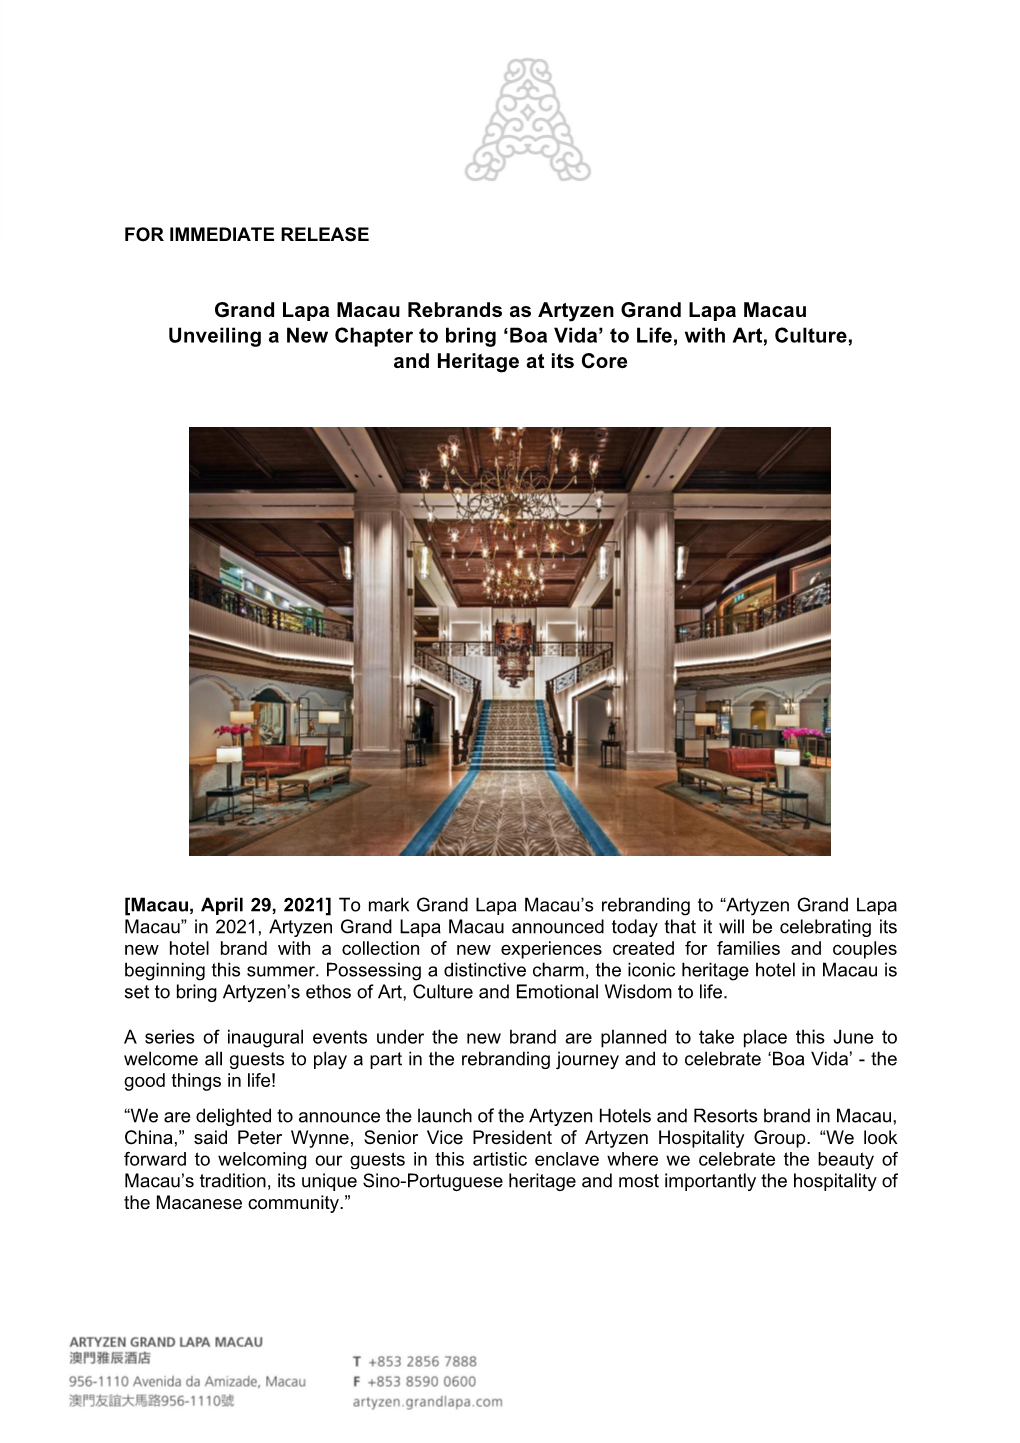 Grand Lapa Macau Rebrands As Artyzen Grand Lapa Macau Unveiling a New Chapter to Bring ‘Boa Vida’ to Life, with Art, Culture, and Heritage at Its Core